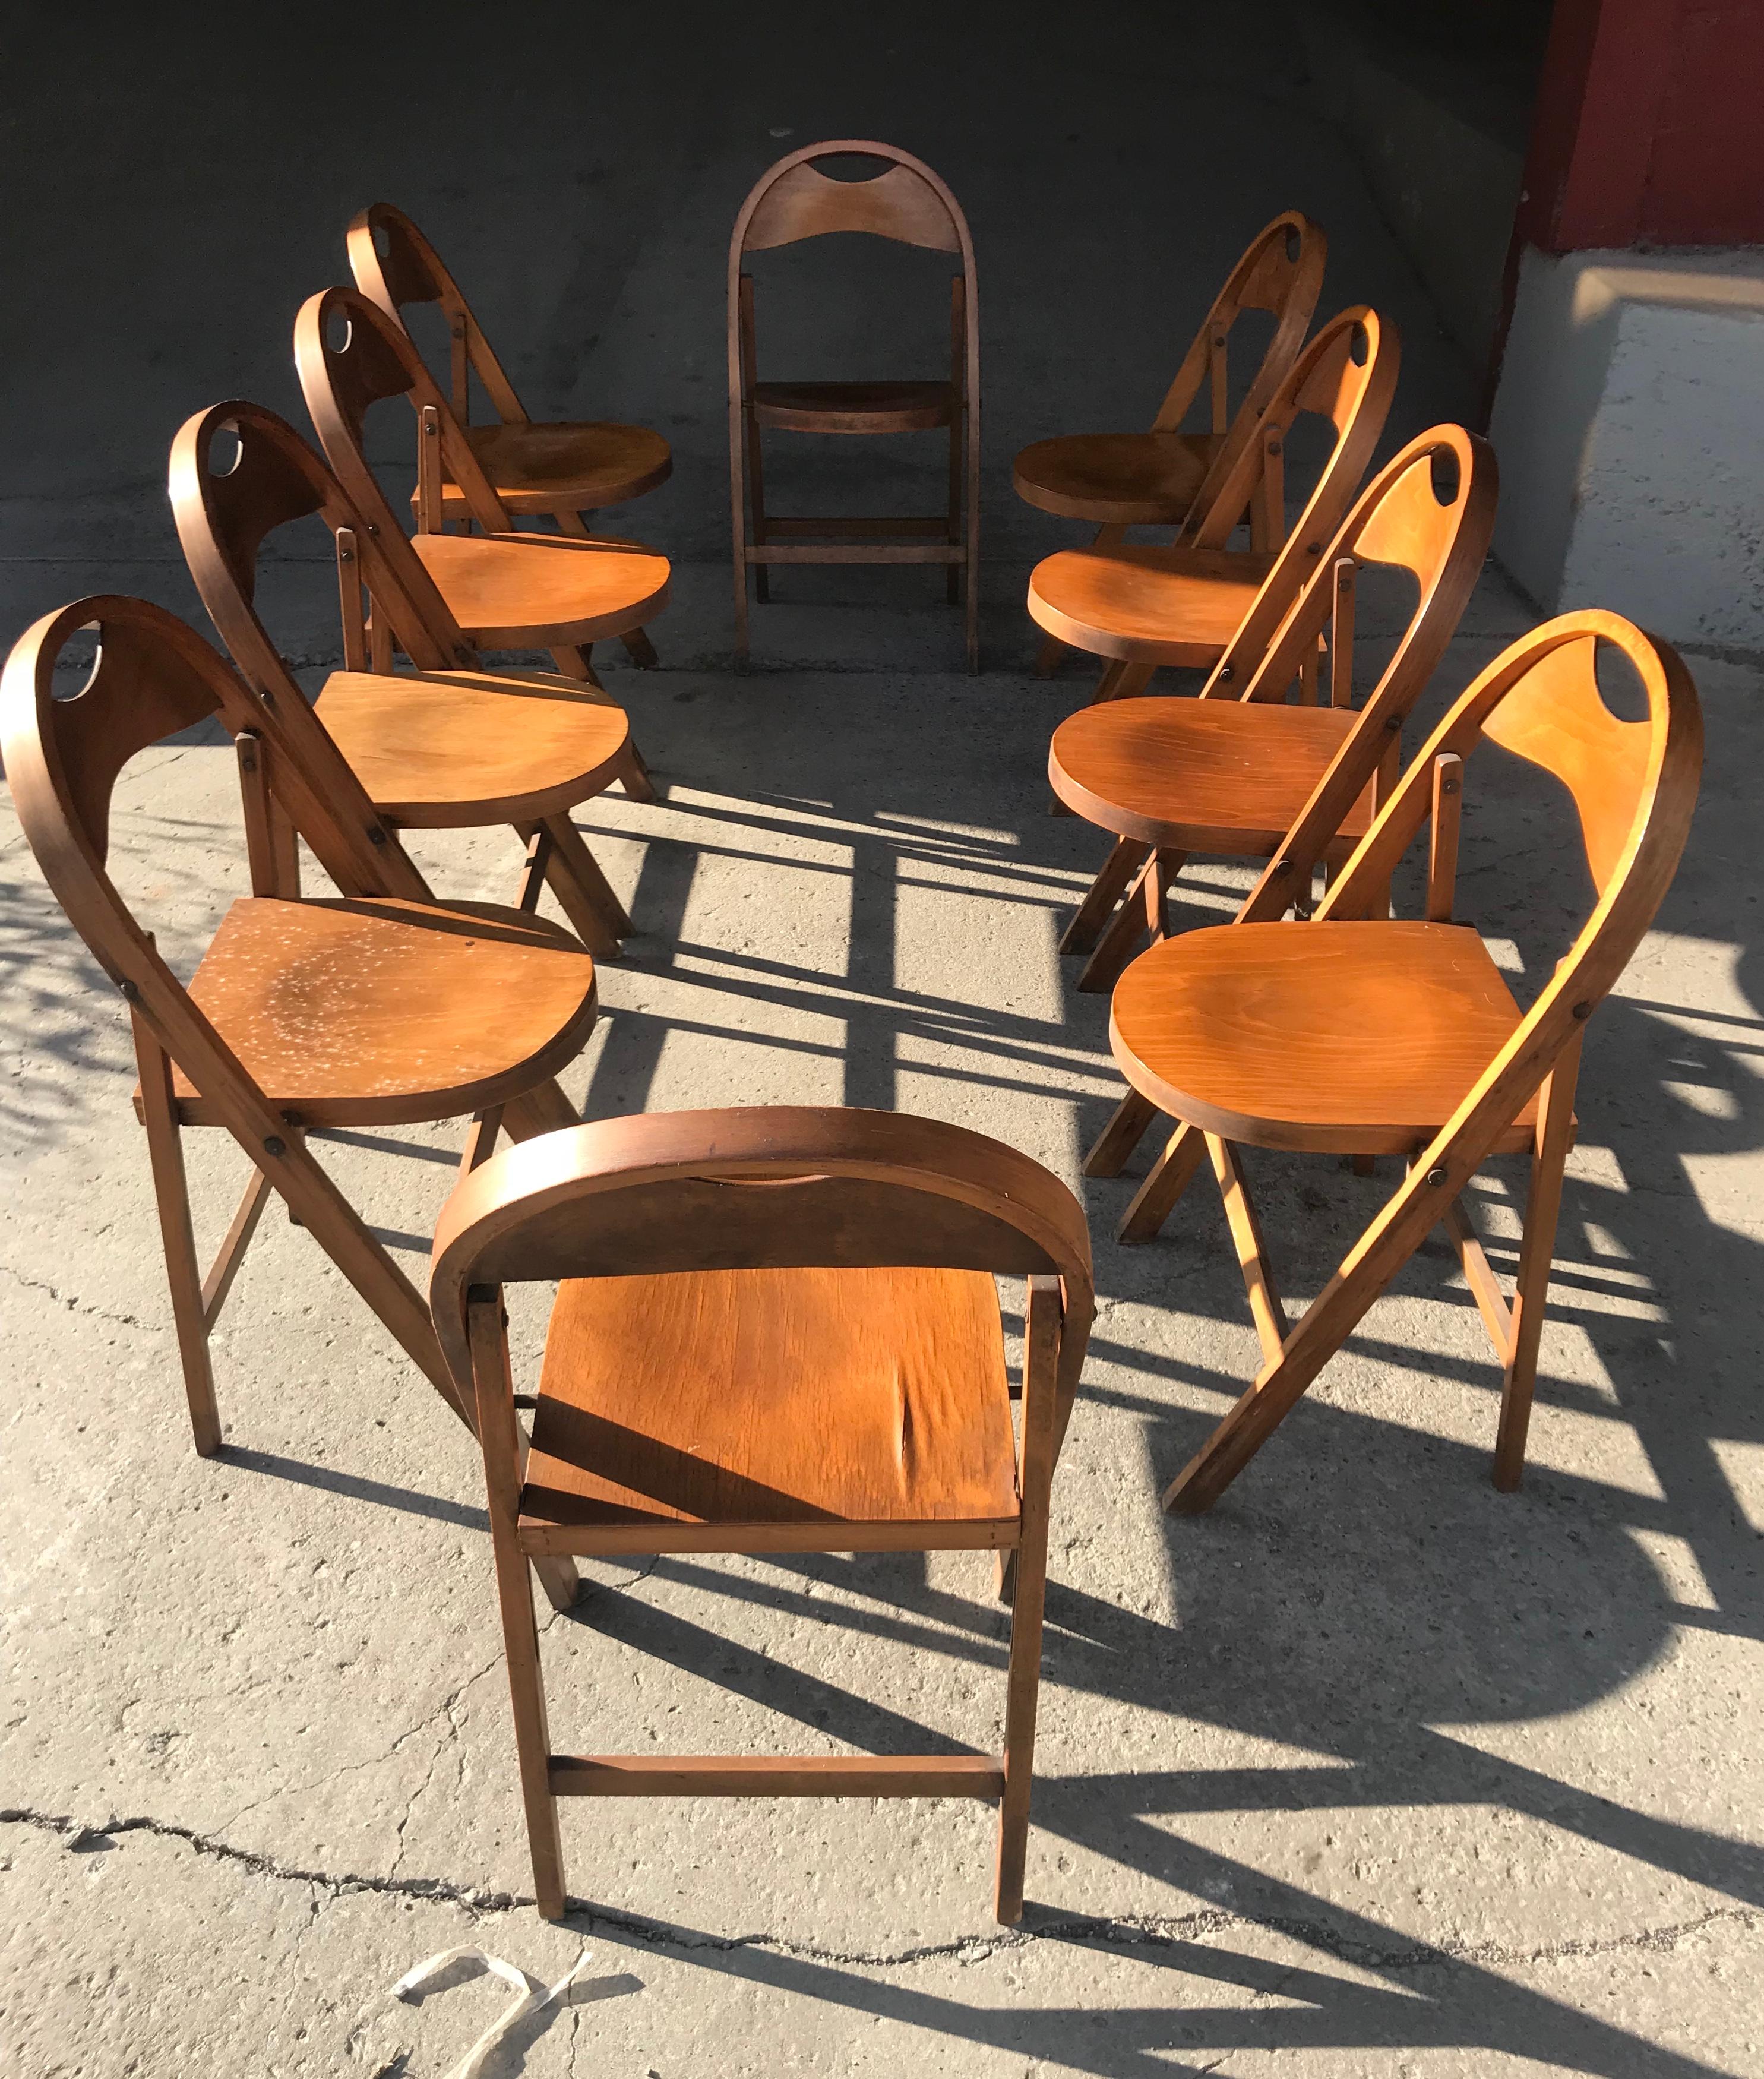 Mid-20th Century Set of 10 Bauhaus Folding Chairs by Thonet